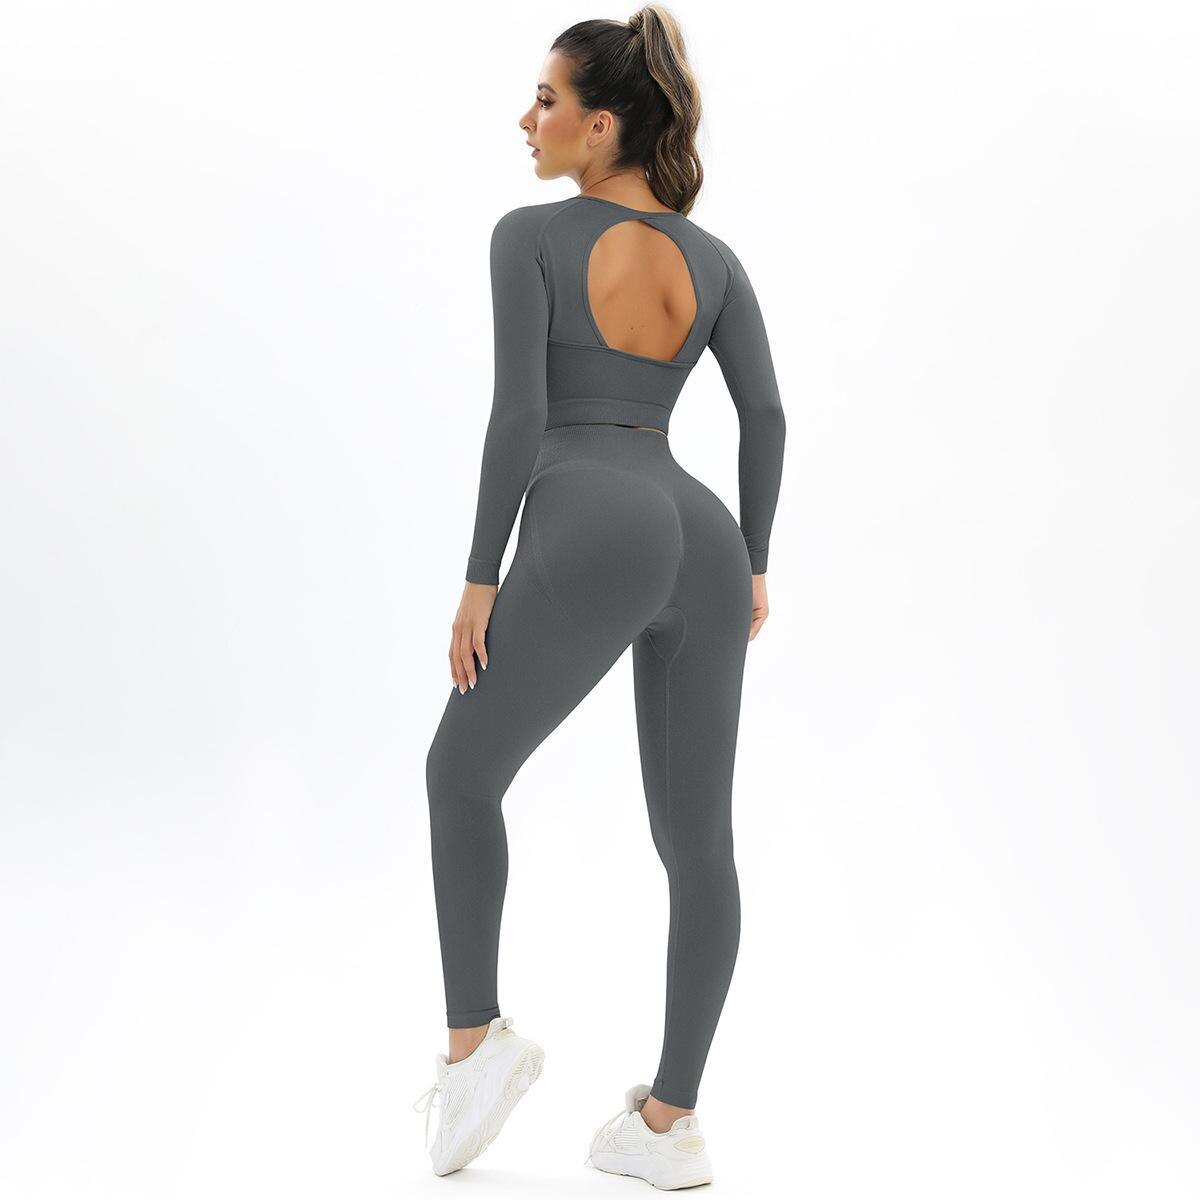 2-Pieces-Yoga-Sets-Sport-Femme-Activewear-Set-Girls-Seamless-Fitness-Suit-Workout-Clothes-Athletic-Wear-5